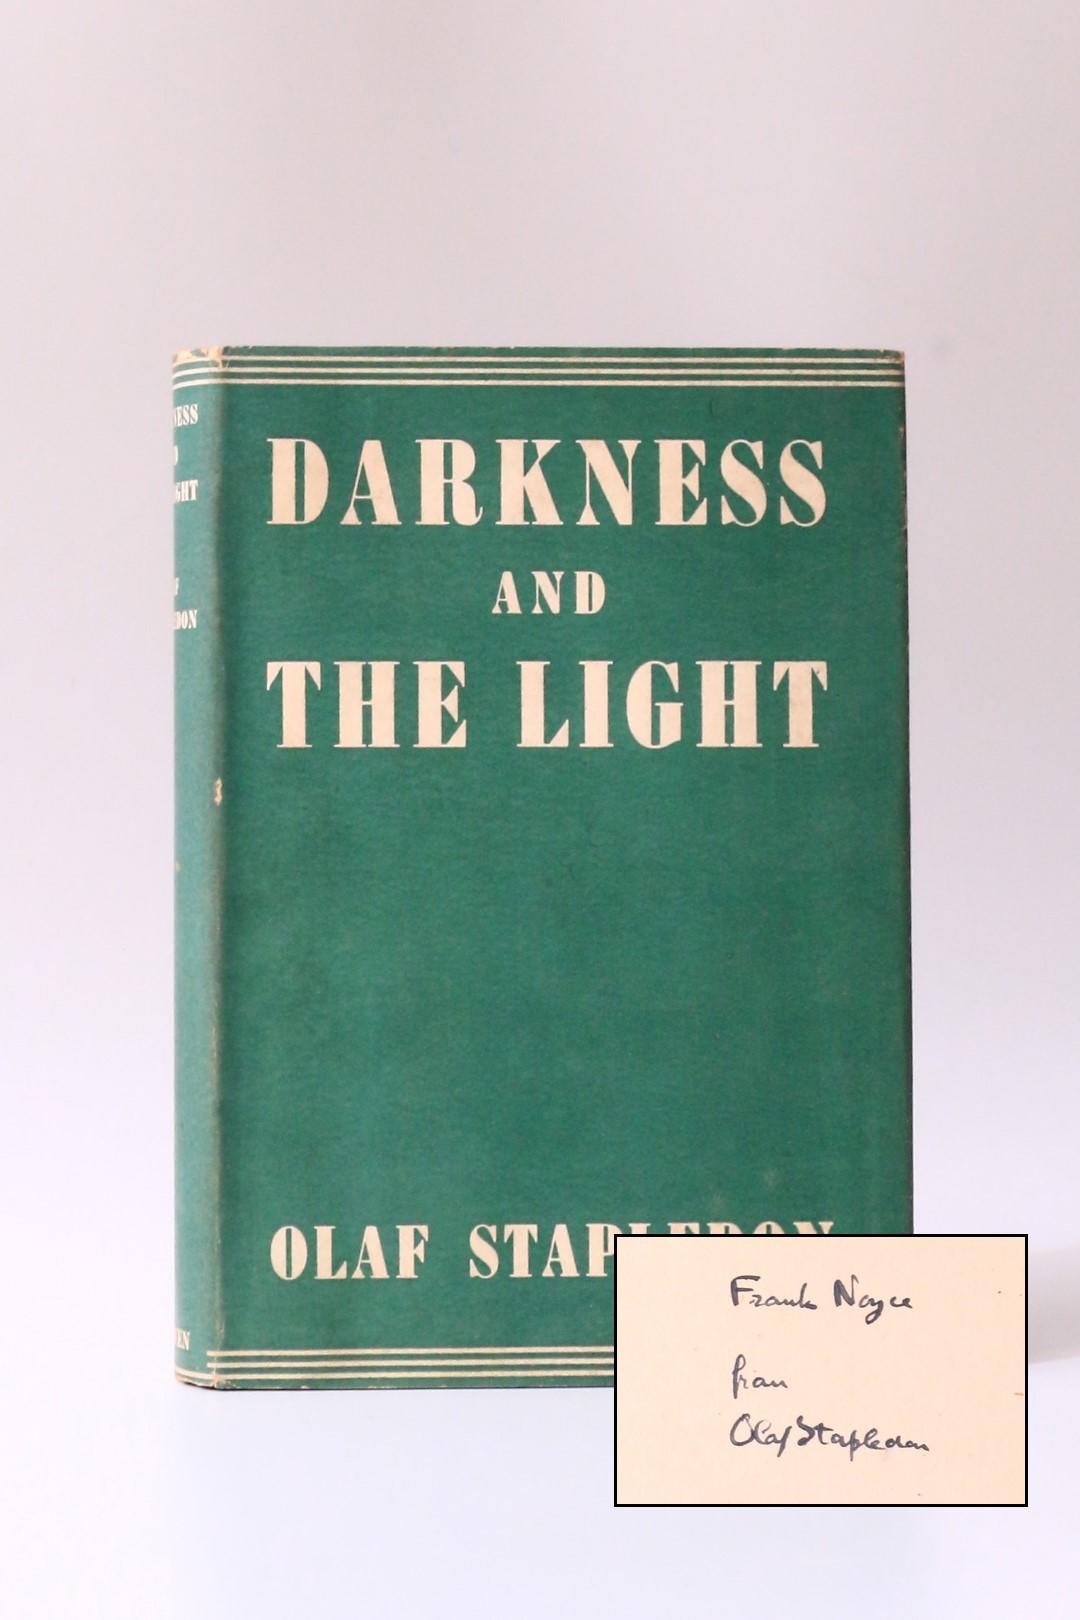 Olaf Stapledon - Darkness and the Light - Methuen, 1942, Signed First Edition.